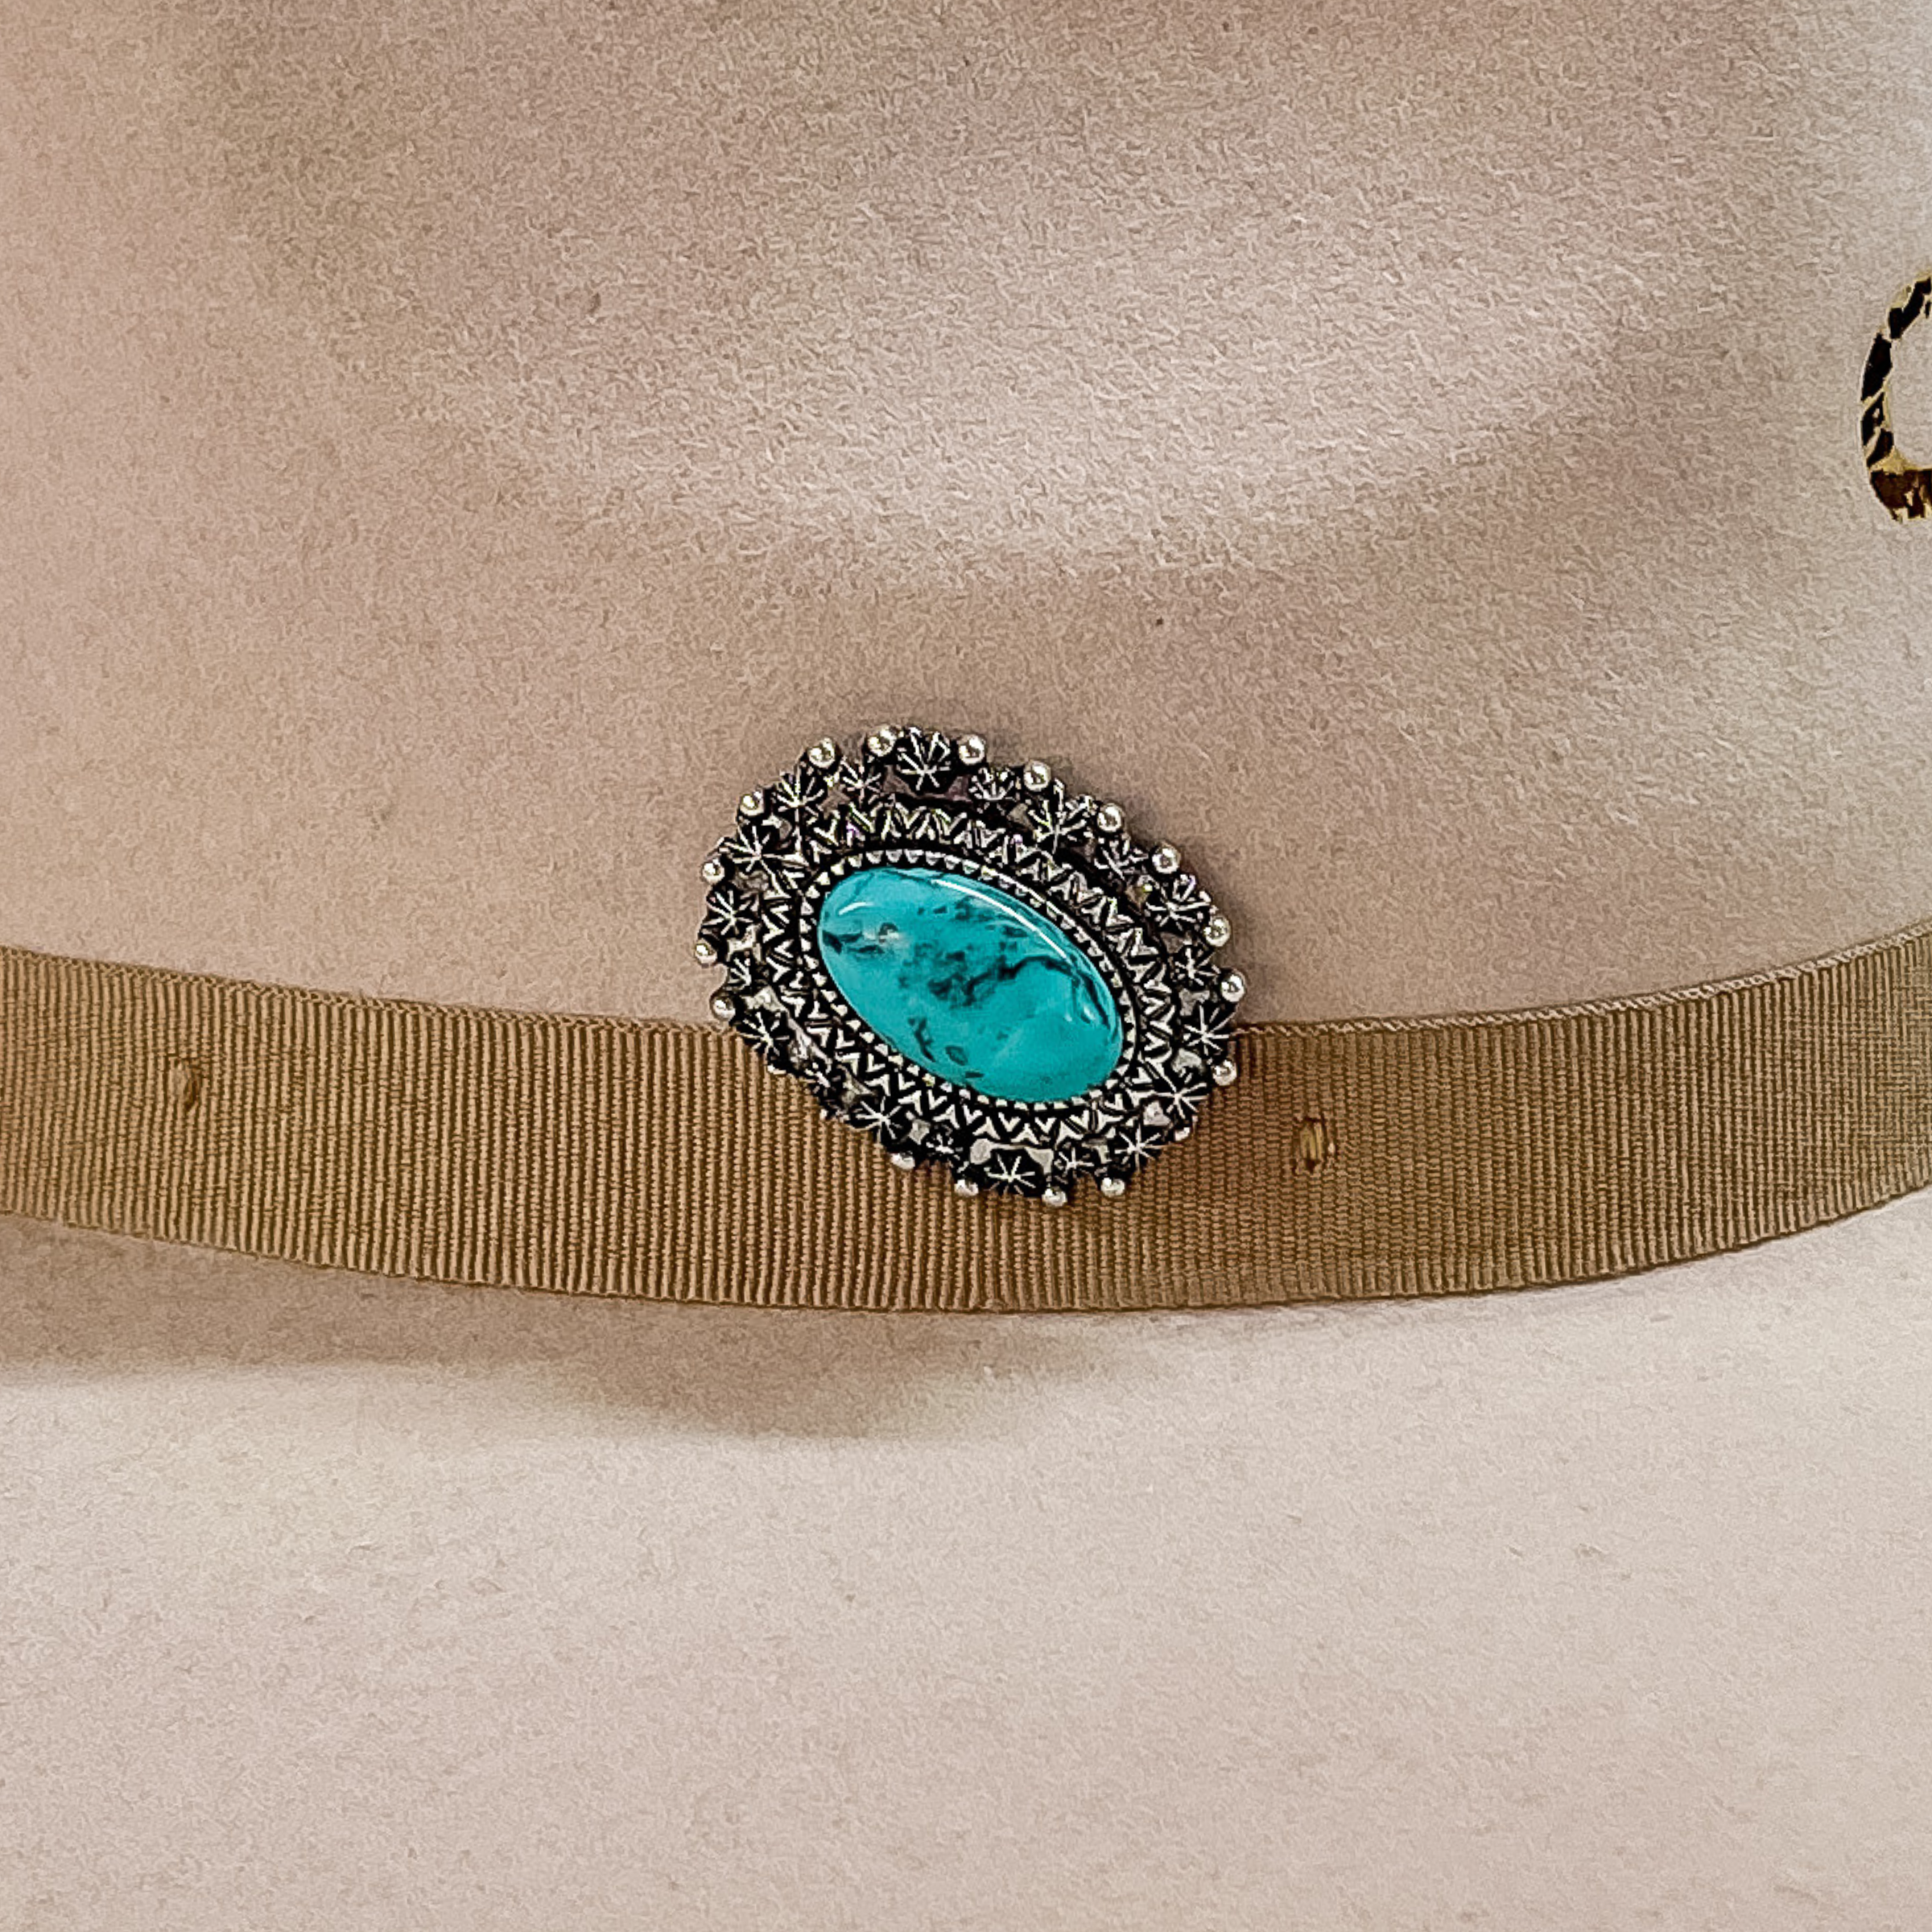 Silver, oval concho with detailed carving and a large center turquoise stone hat pin. This hat pin is pictured on a beige hat. 